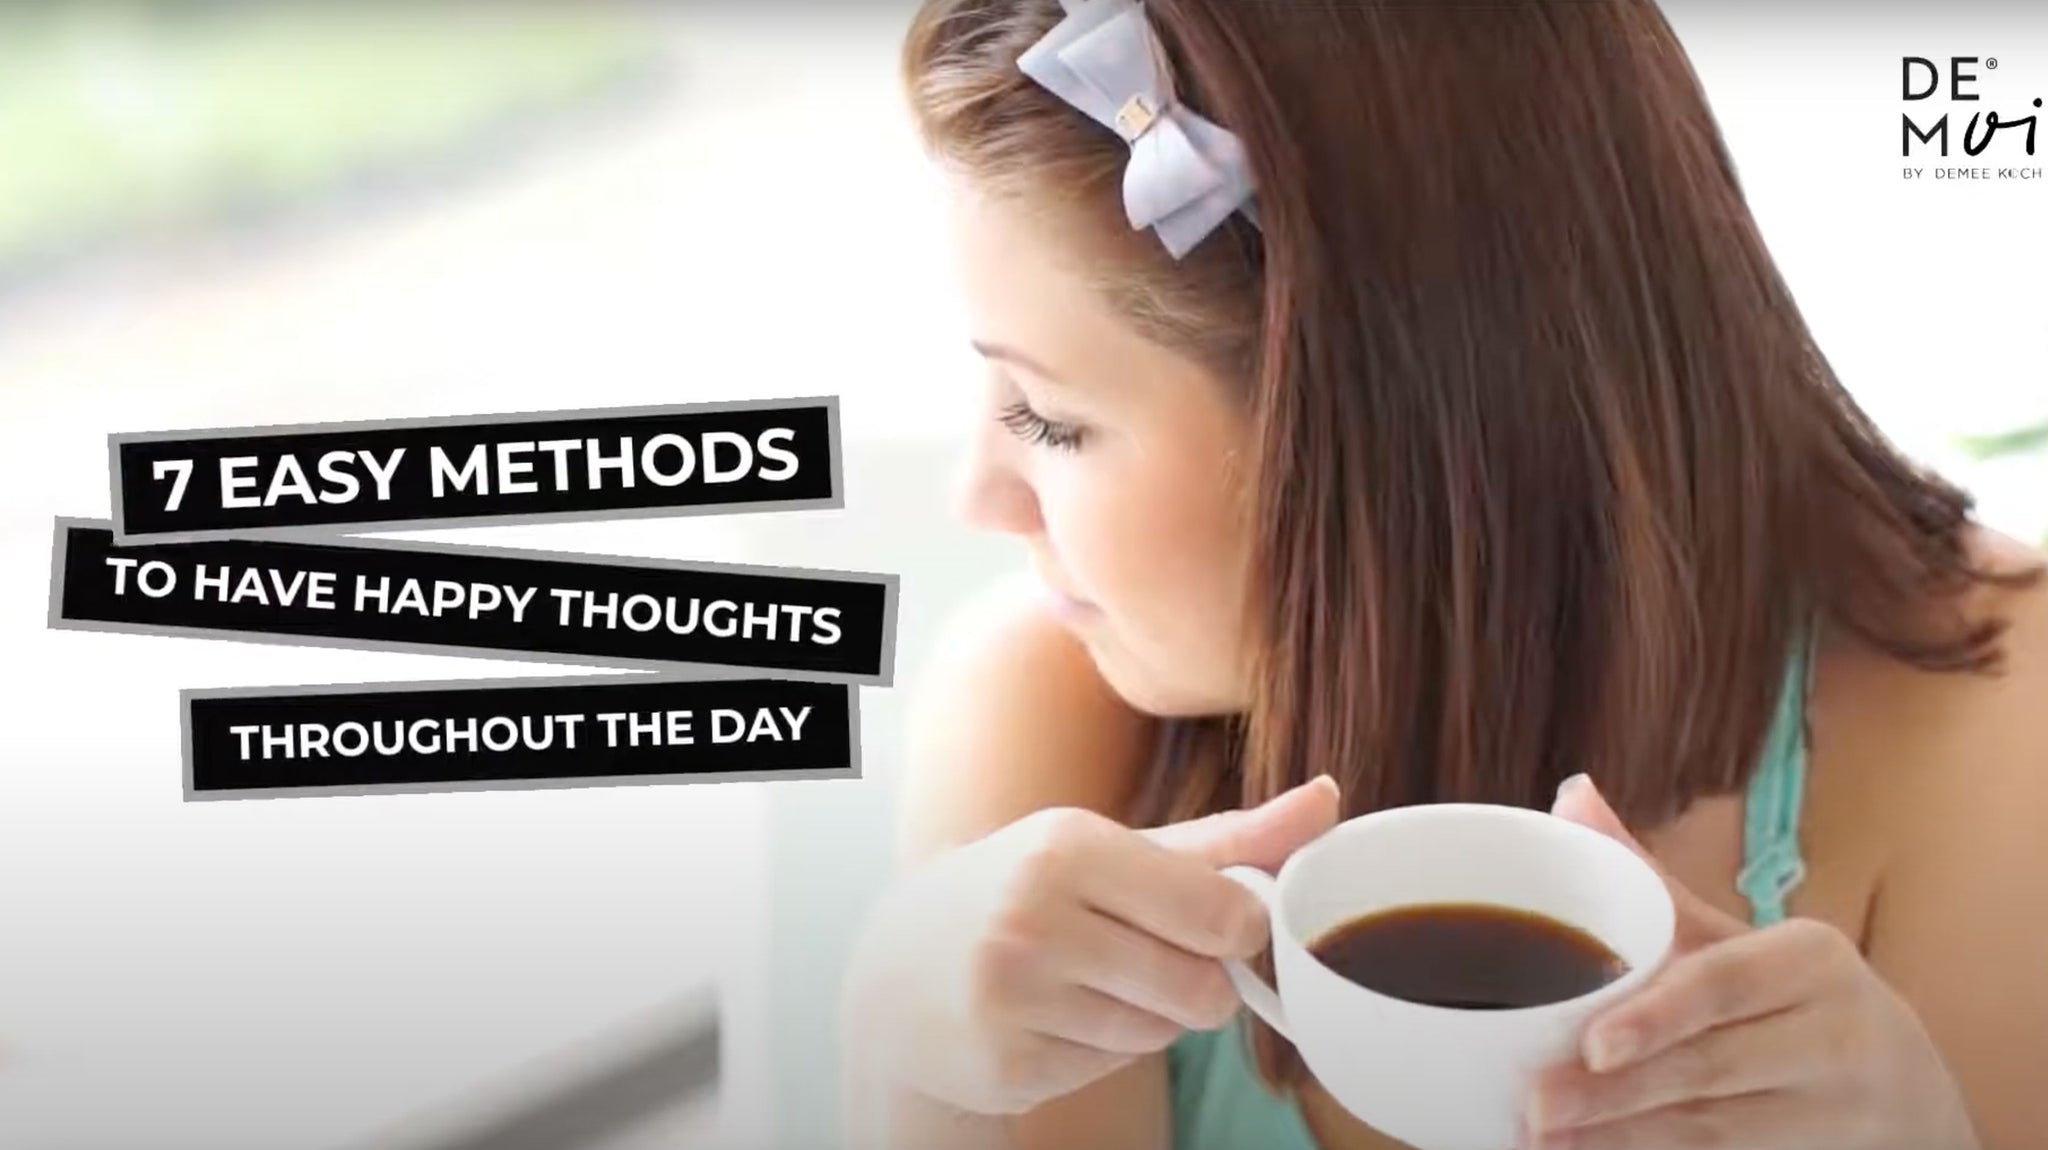 7 Easy Methods To Have Happy Thoughts Throughout The Day